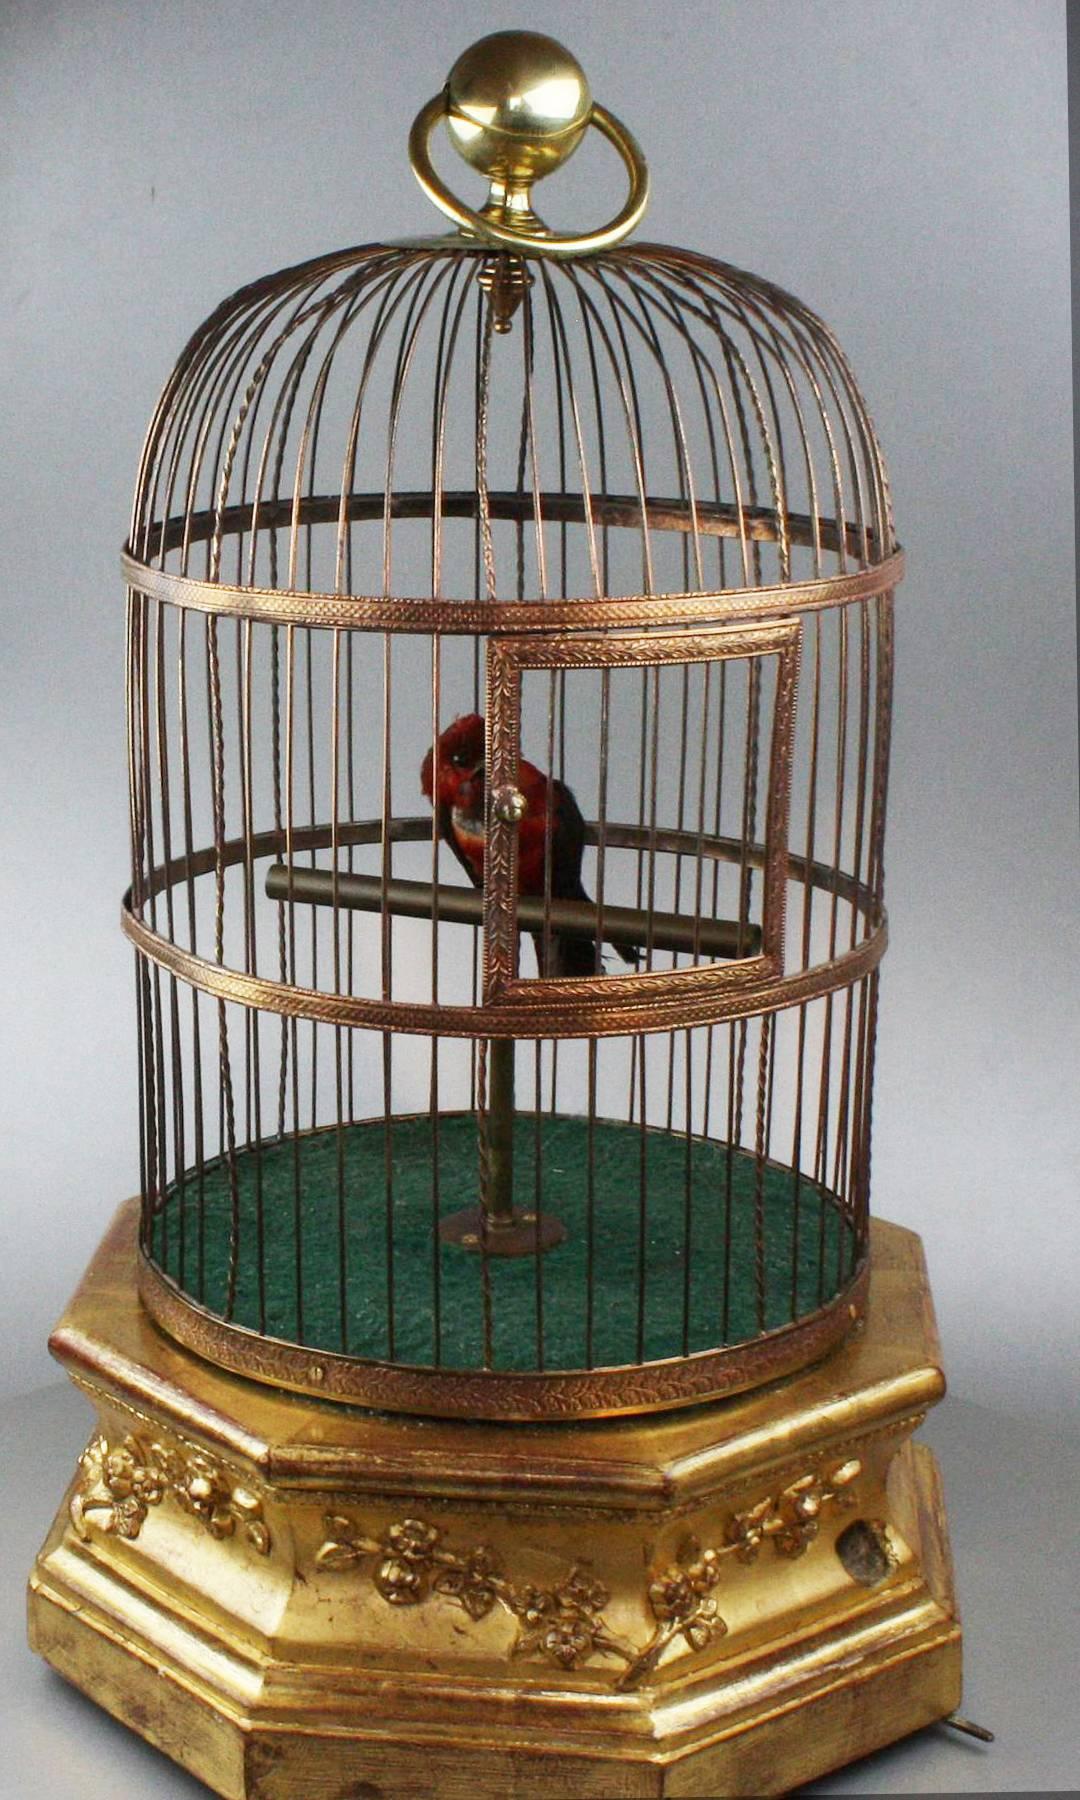 A fine large antique hexagonal base single singing bird in cage by Bontems.
 
French,
 
circa 1900.
 
Video available upon request
 
When wound and the start/stop lever actuated, the full taxidermy perched bird moves beak, bobs tailfeather